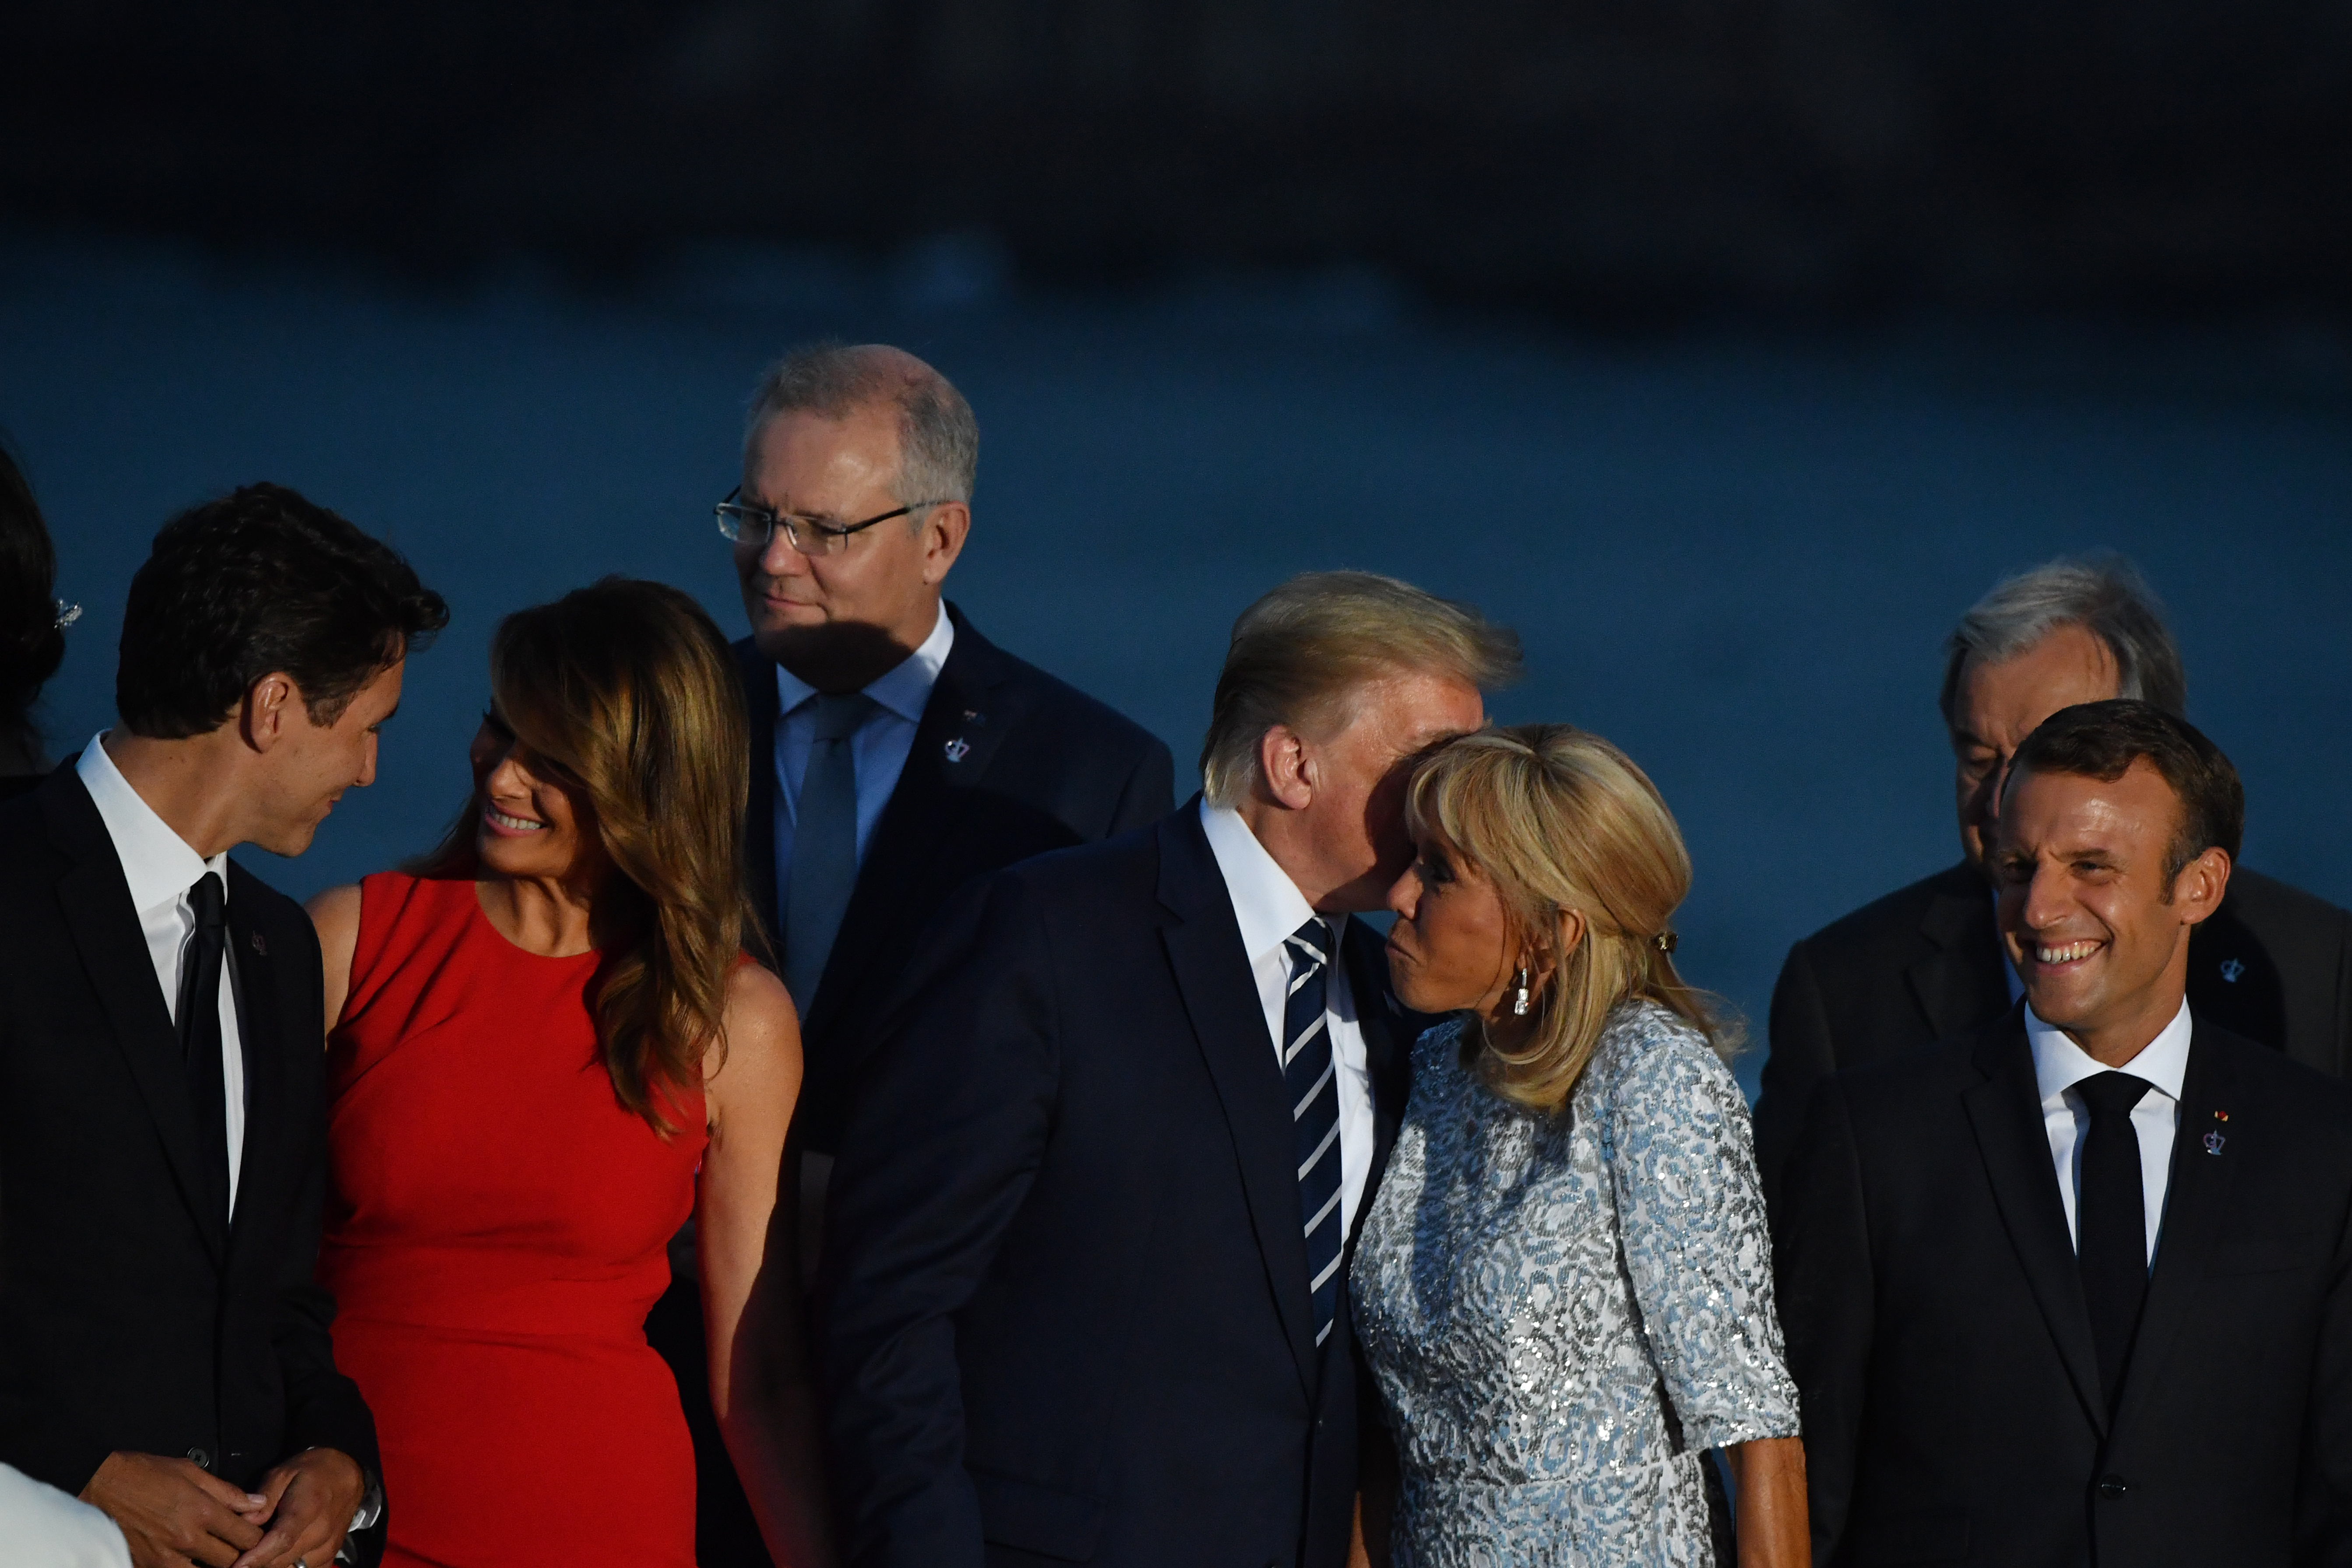 Feel Free To Enjoy These Photos Of Scott Morrison Being A Complete Nigel At The G7 Conference